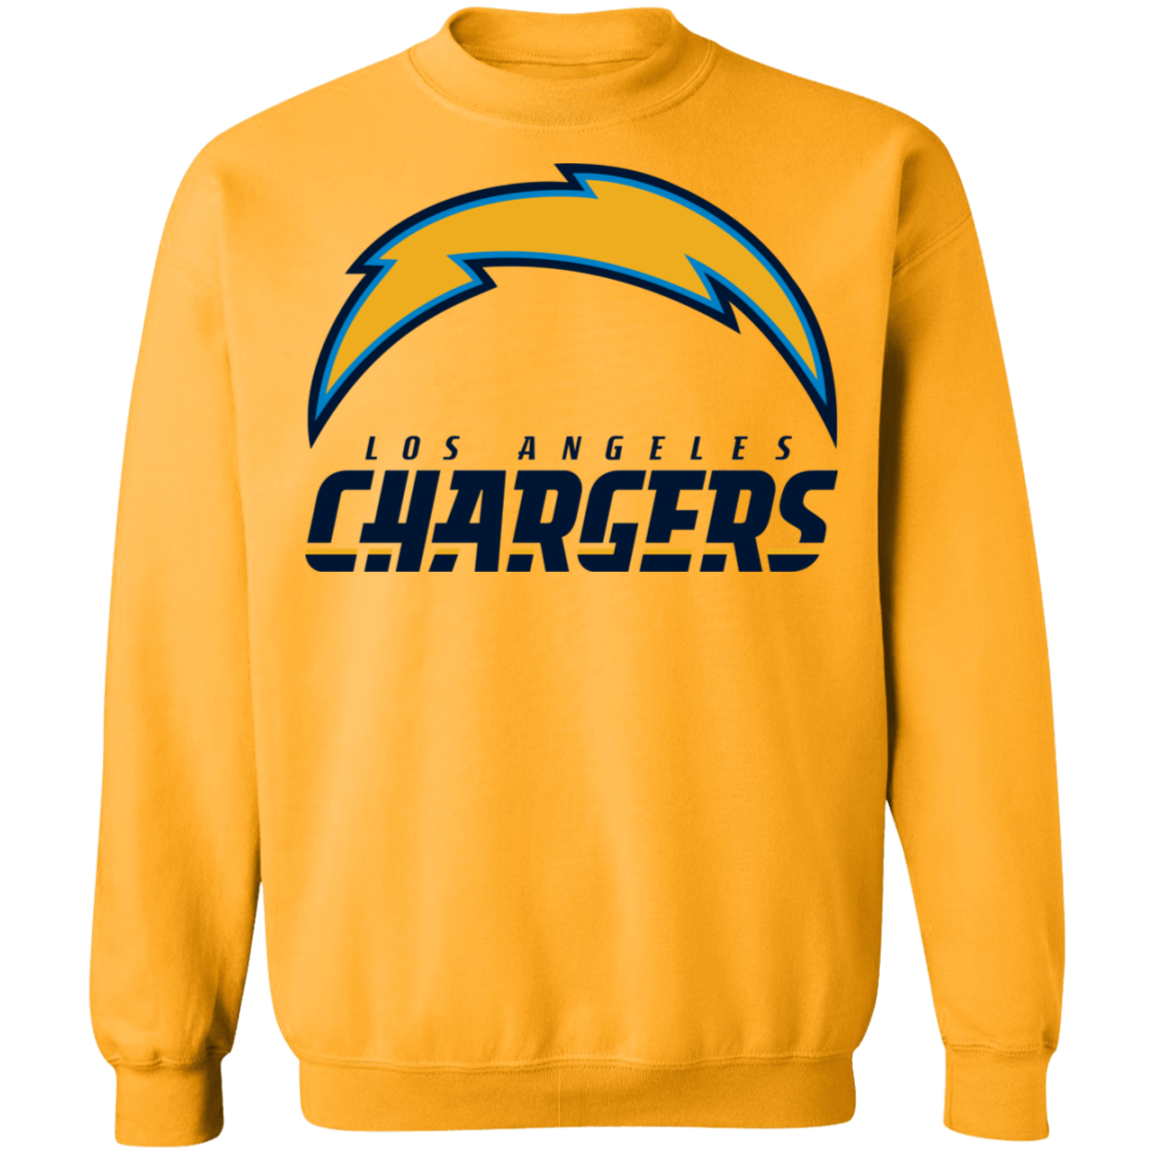 Design los Angeles Chargers Mix Snoopy T Shirt - Limotees